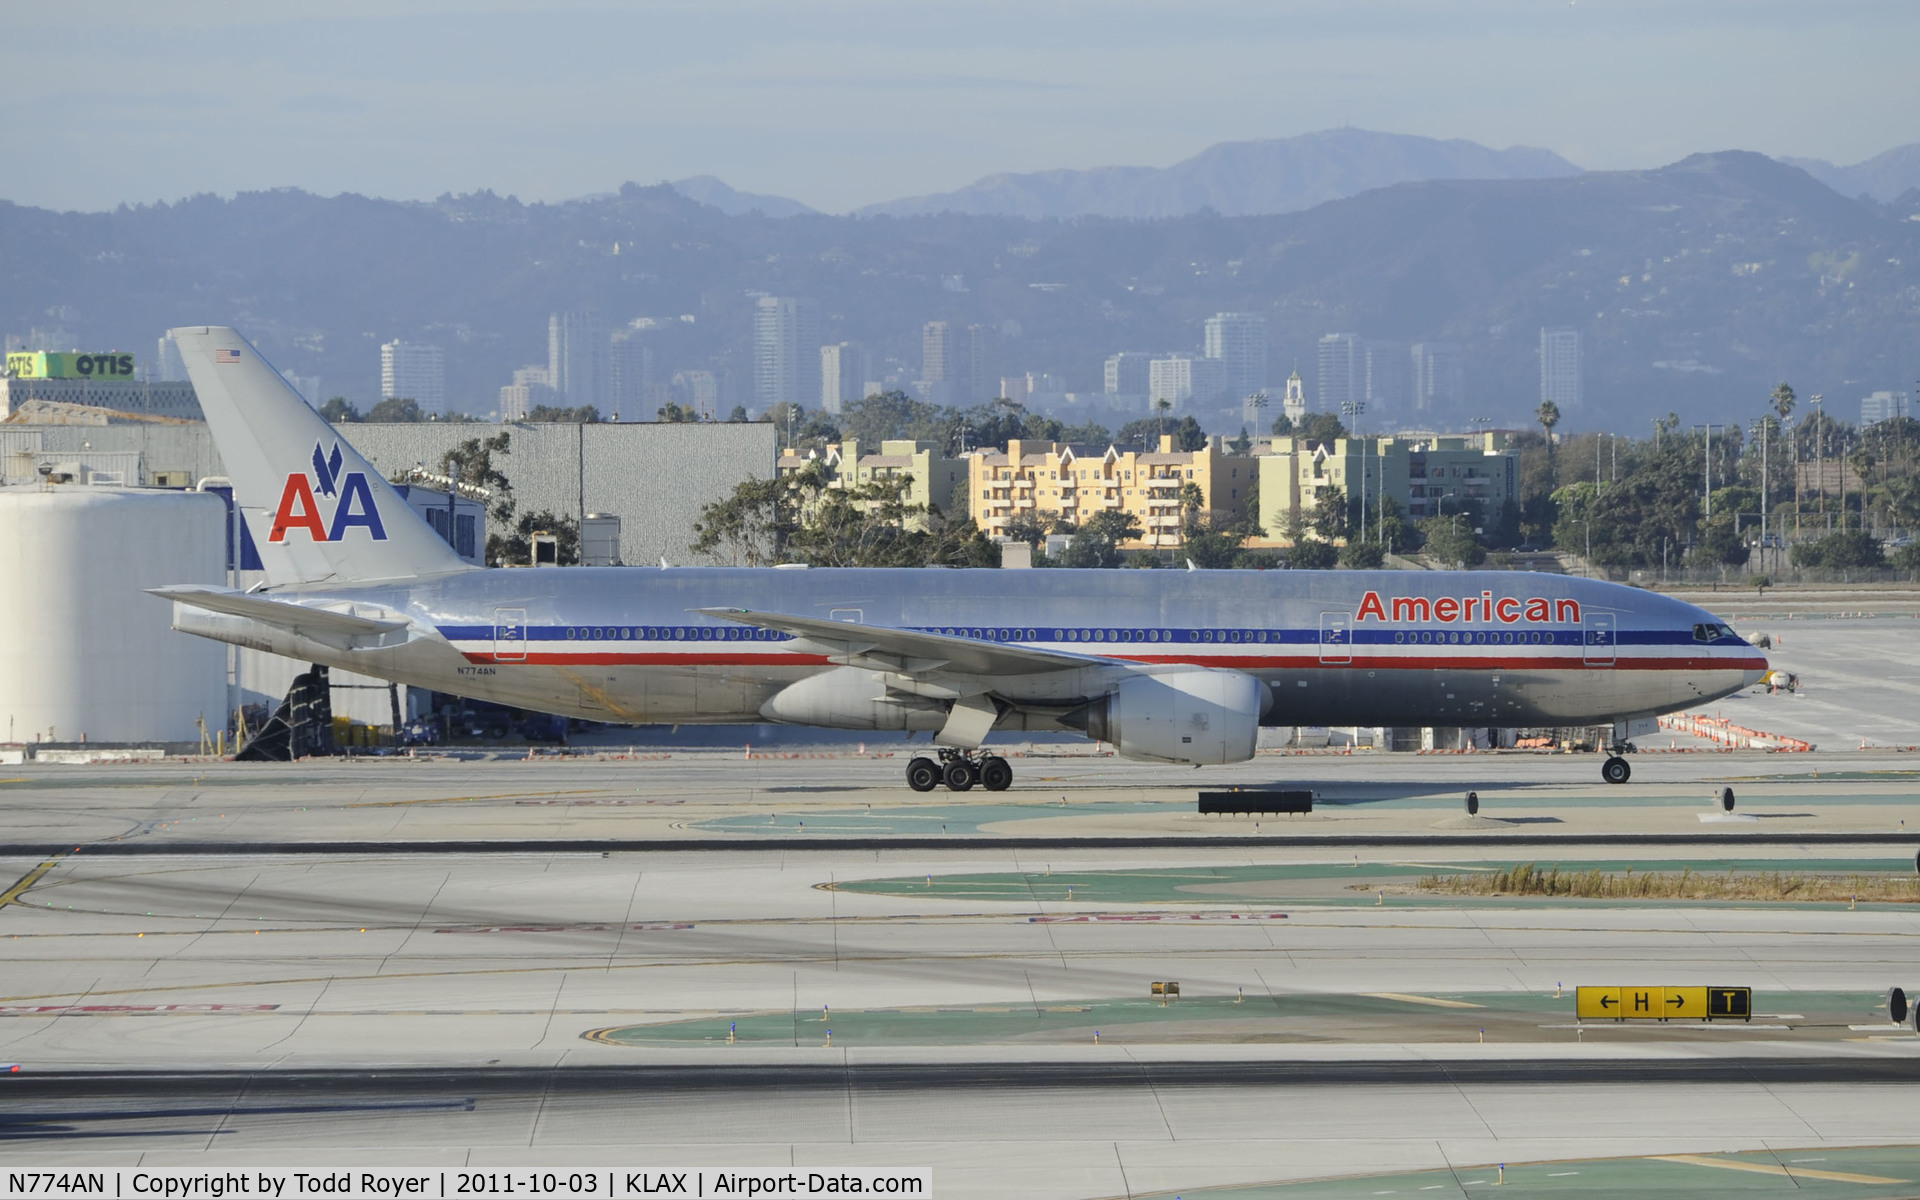 N774AN, 1999 Boeing 777-223 C/N 29581, Taxiing at LAX